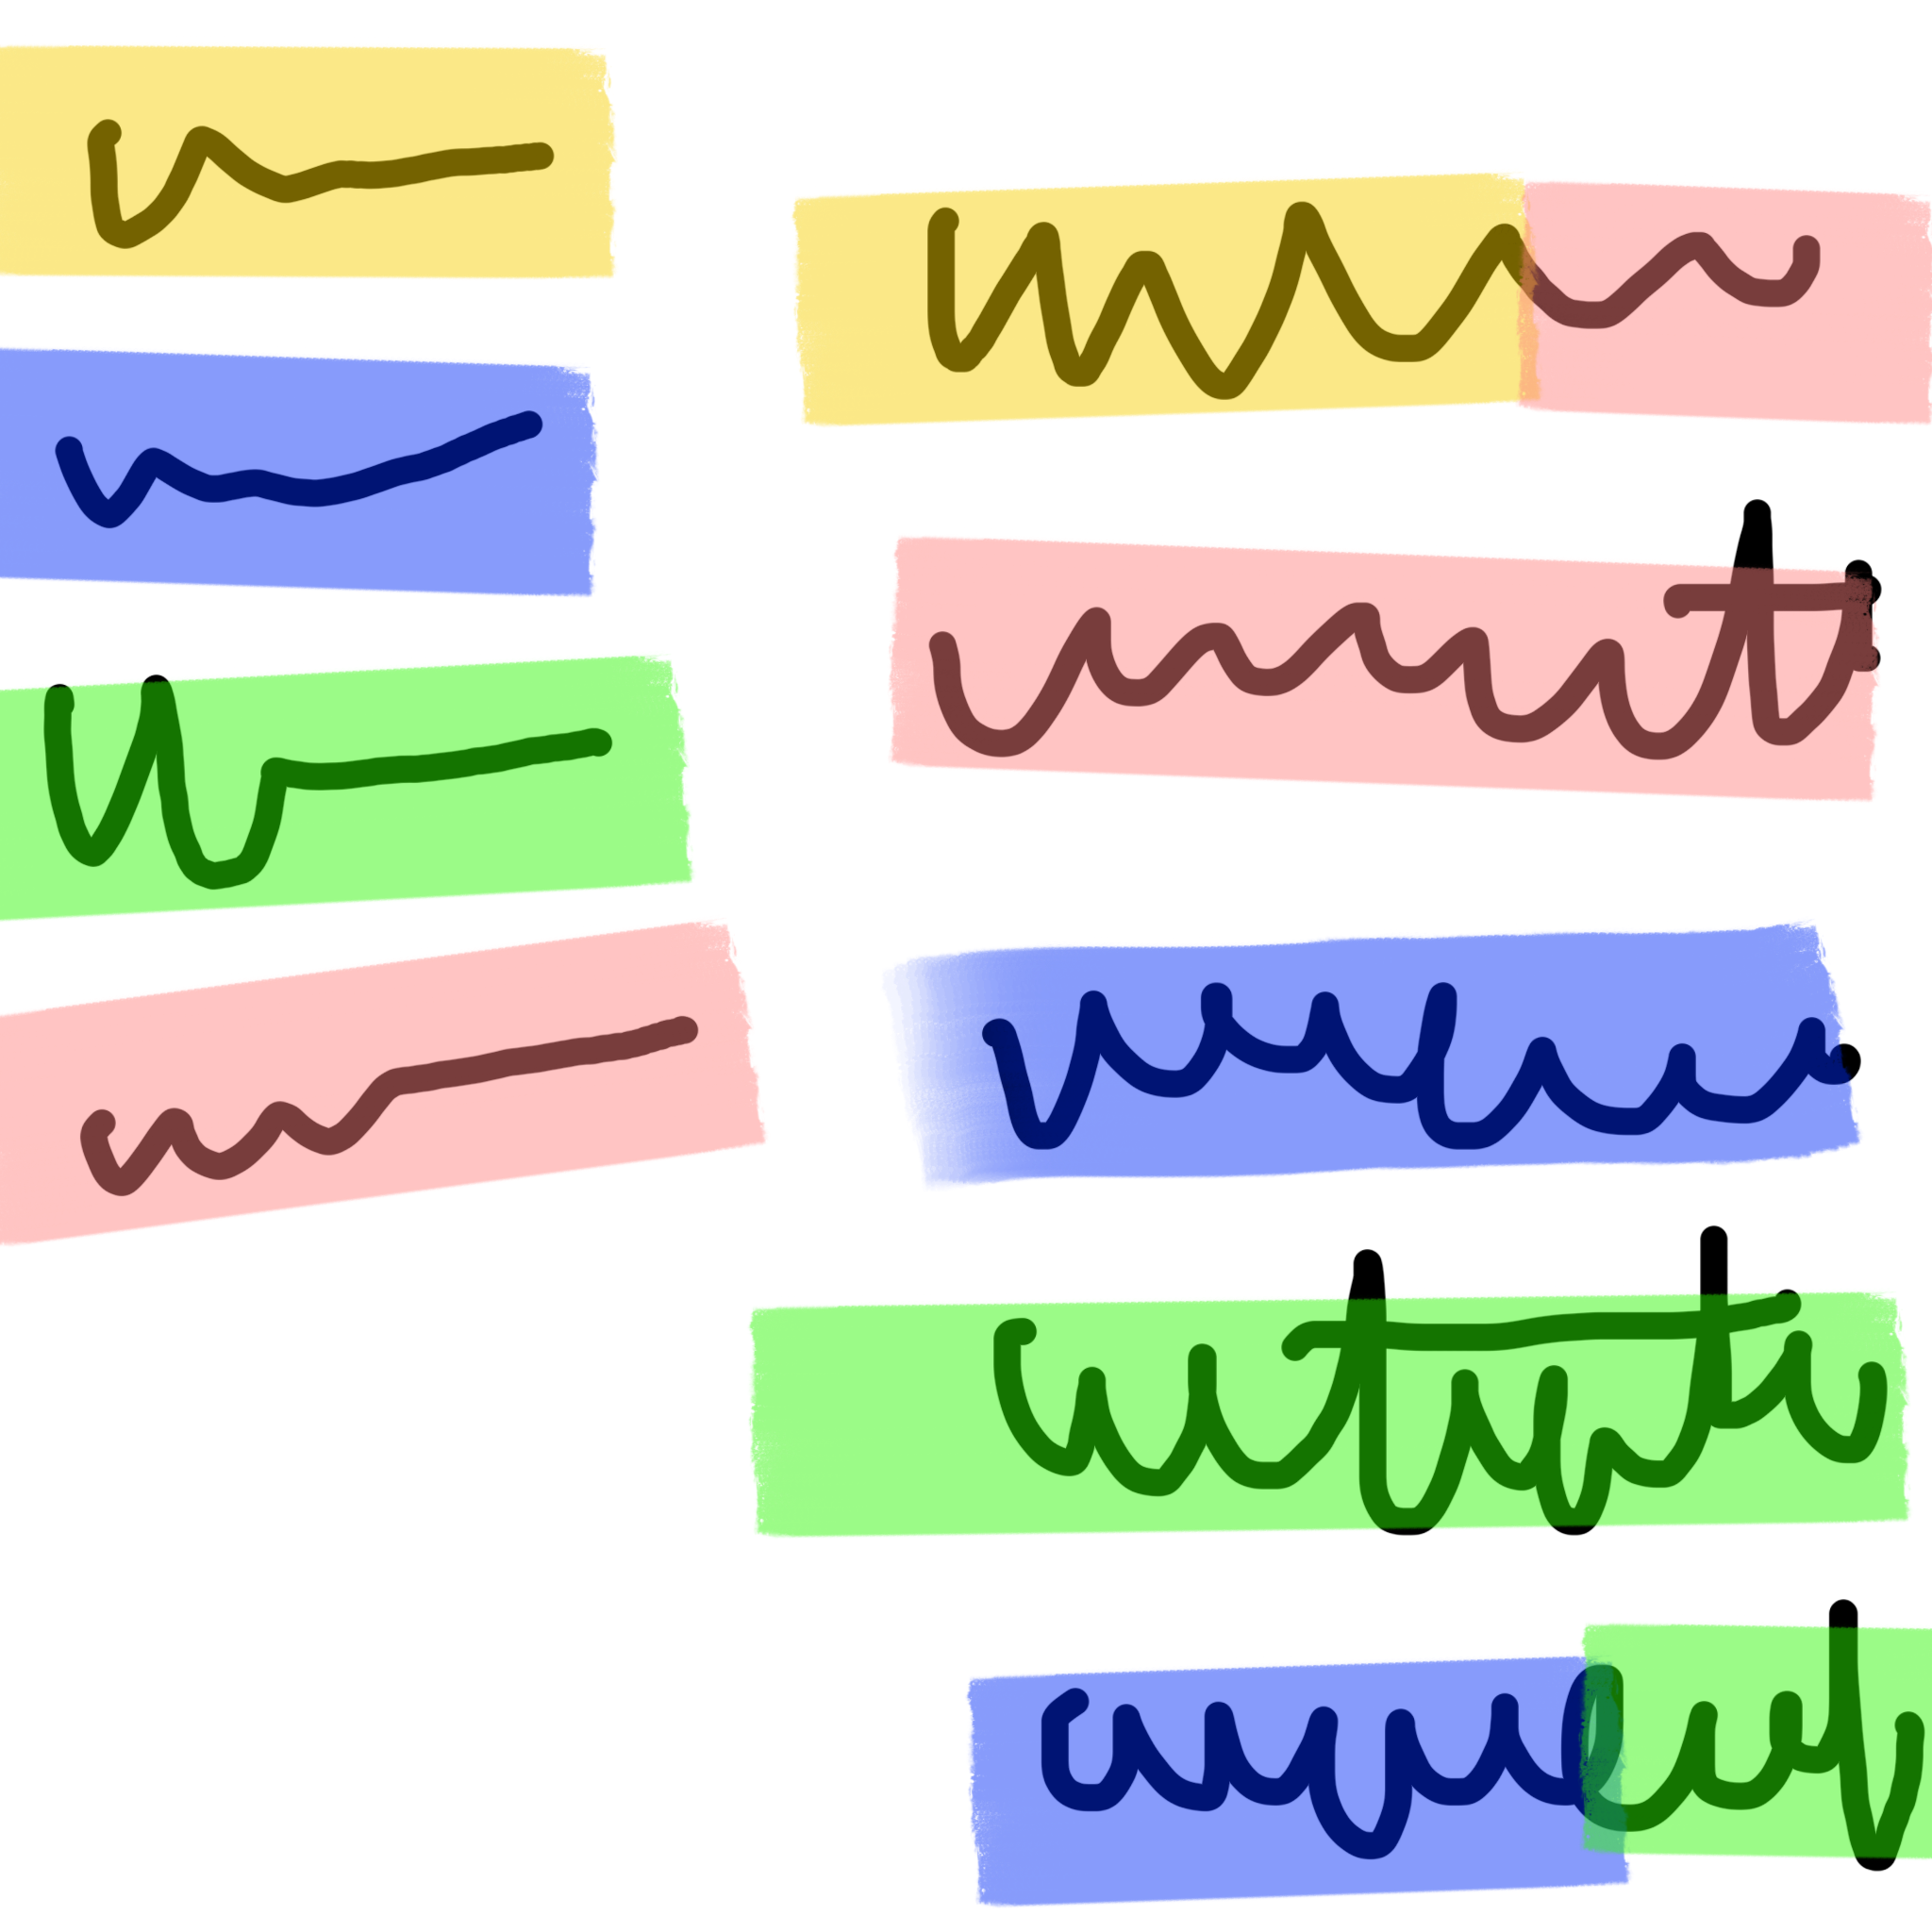  Two columns of black squiggles. The left column is much smaller it only has four rows all very small in length. The top left squiggle has a semi-transparent yellow rectangle over it. The second left squiggle has a semi-transparent blue rectangle over it. The third left squiggle has a green semi-transparent rectangle over it. The final squiggle on the left has a semi-transparent pink rectangle over it. The column of squiggles on the right has five rows of squiggles that are longer than the squiggles on the left. The top right squiggle has two rectangles over it, there is a yellow rectangle covering most of it and a small section on the end has a pink semi-transparent rectangle over it. The second squiggle on the right is all covered by a semi-transparent pink rectangle. The third squiggle on the right is covered in a blue semi-transparent rectangle. The fourth squiggle on the right has a bright green semi-transparent rectangle over it. The final squiggle on the right is has two rectangles over it. The majority of it is covered in a blue semi-transparent rectangle. A small part on the end is covered in a green semi-transparent rectangle over it.